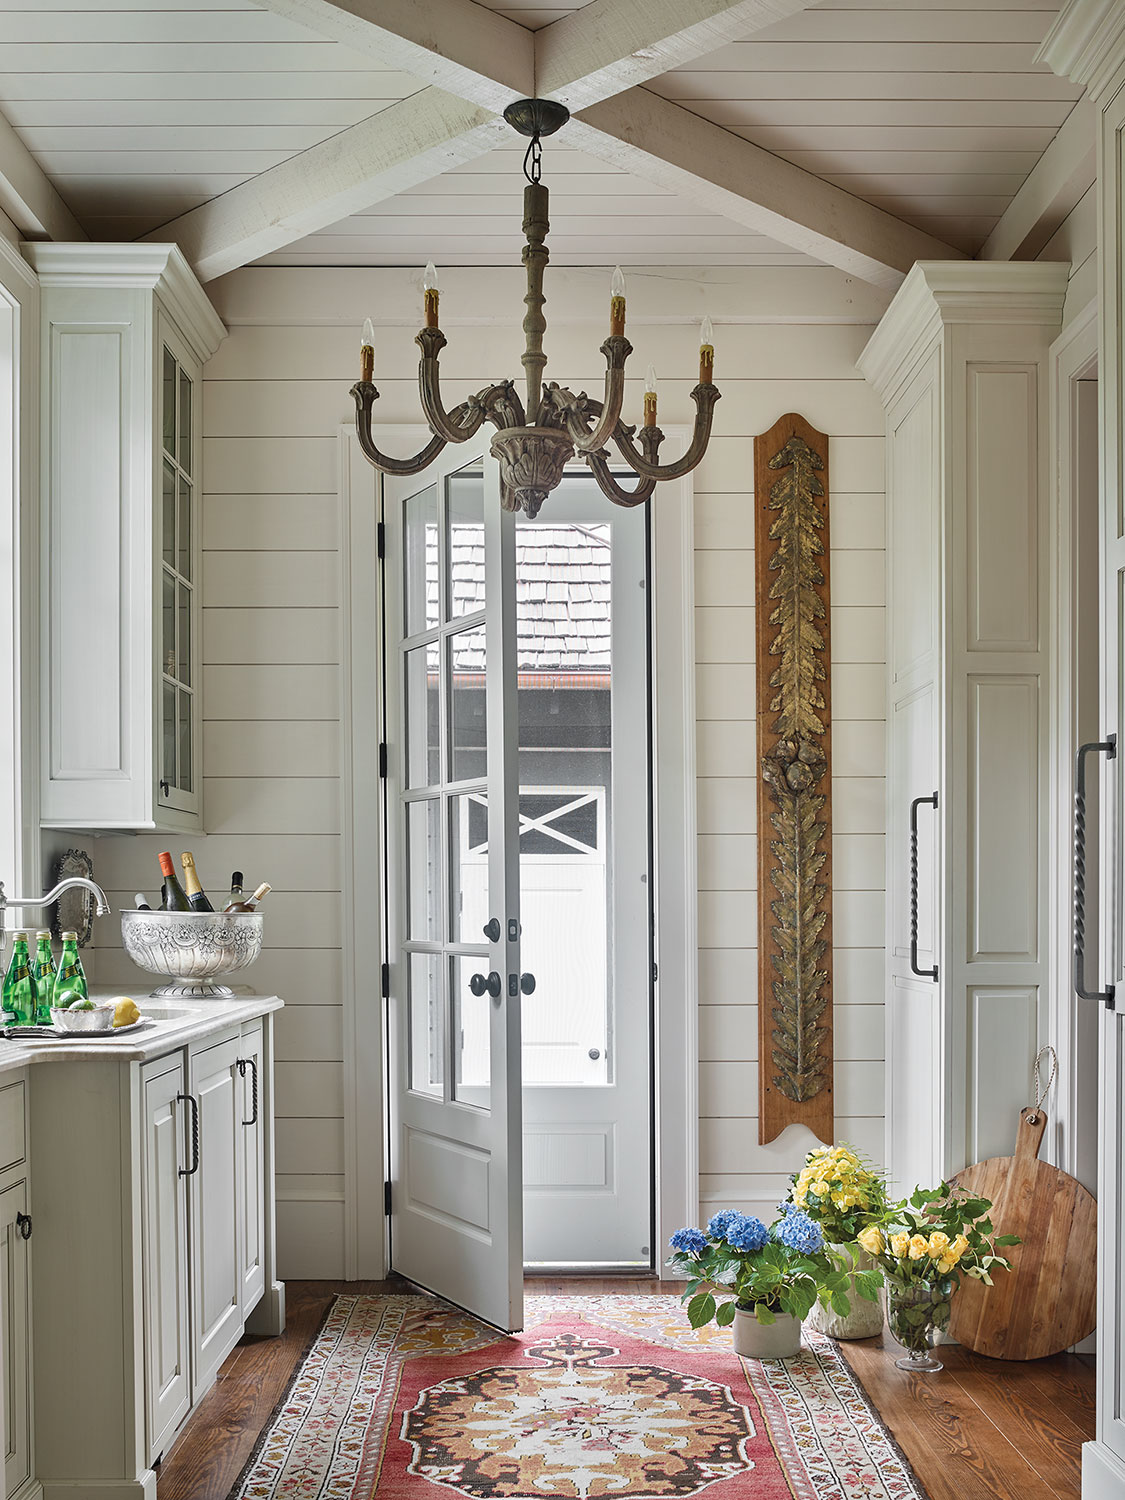 The elegant working pantry. The door leads to a detached two-car garage.